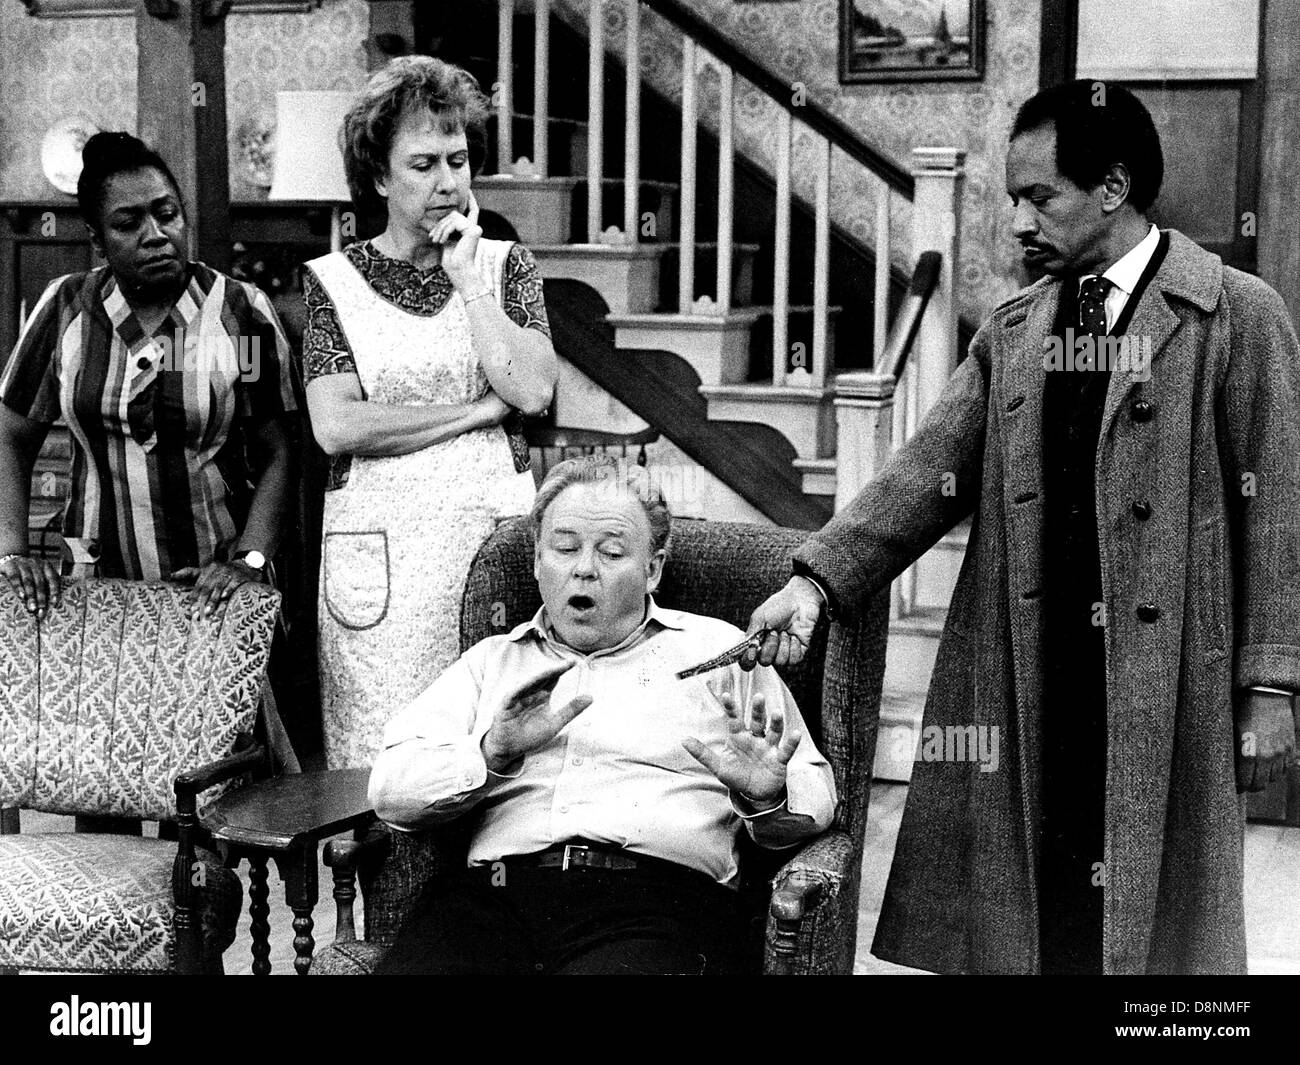 FILE PHOTO - JEAN STAPLETON, the veteran of stage and film best known as Archie Bunker's long-suffering wife Edith in the seminal TV series 'All In The Family,' died Friday May 31, 2013 at her home in New York City. She was 90. PICTURED: Jan. 1, 1971 - Los Angeles, California, U.S. - ISABEL SANFORD, JEAN STAPLETON, CARROLL O'CONNOR and SHERMAN HEMSLEY in an undated still from 'All In The Family.' (Credit Image: © Globe Photos/ZUMAPRESS.com) Stock Photo